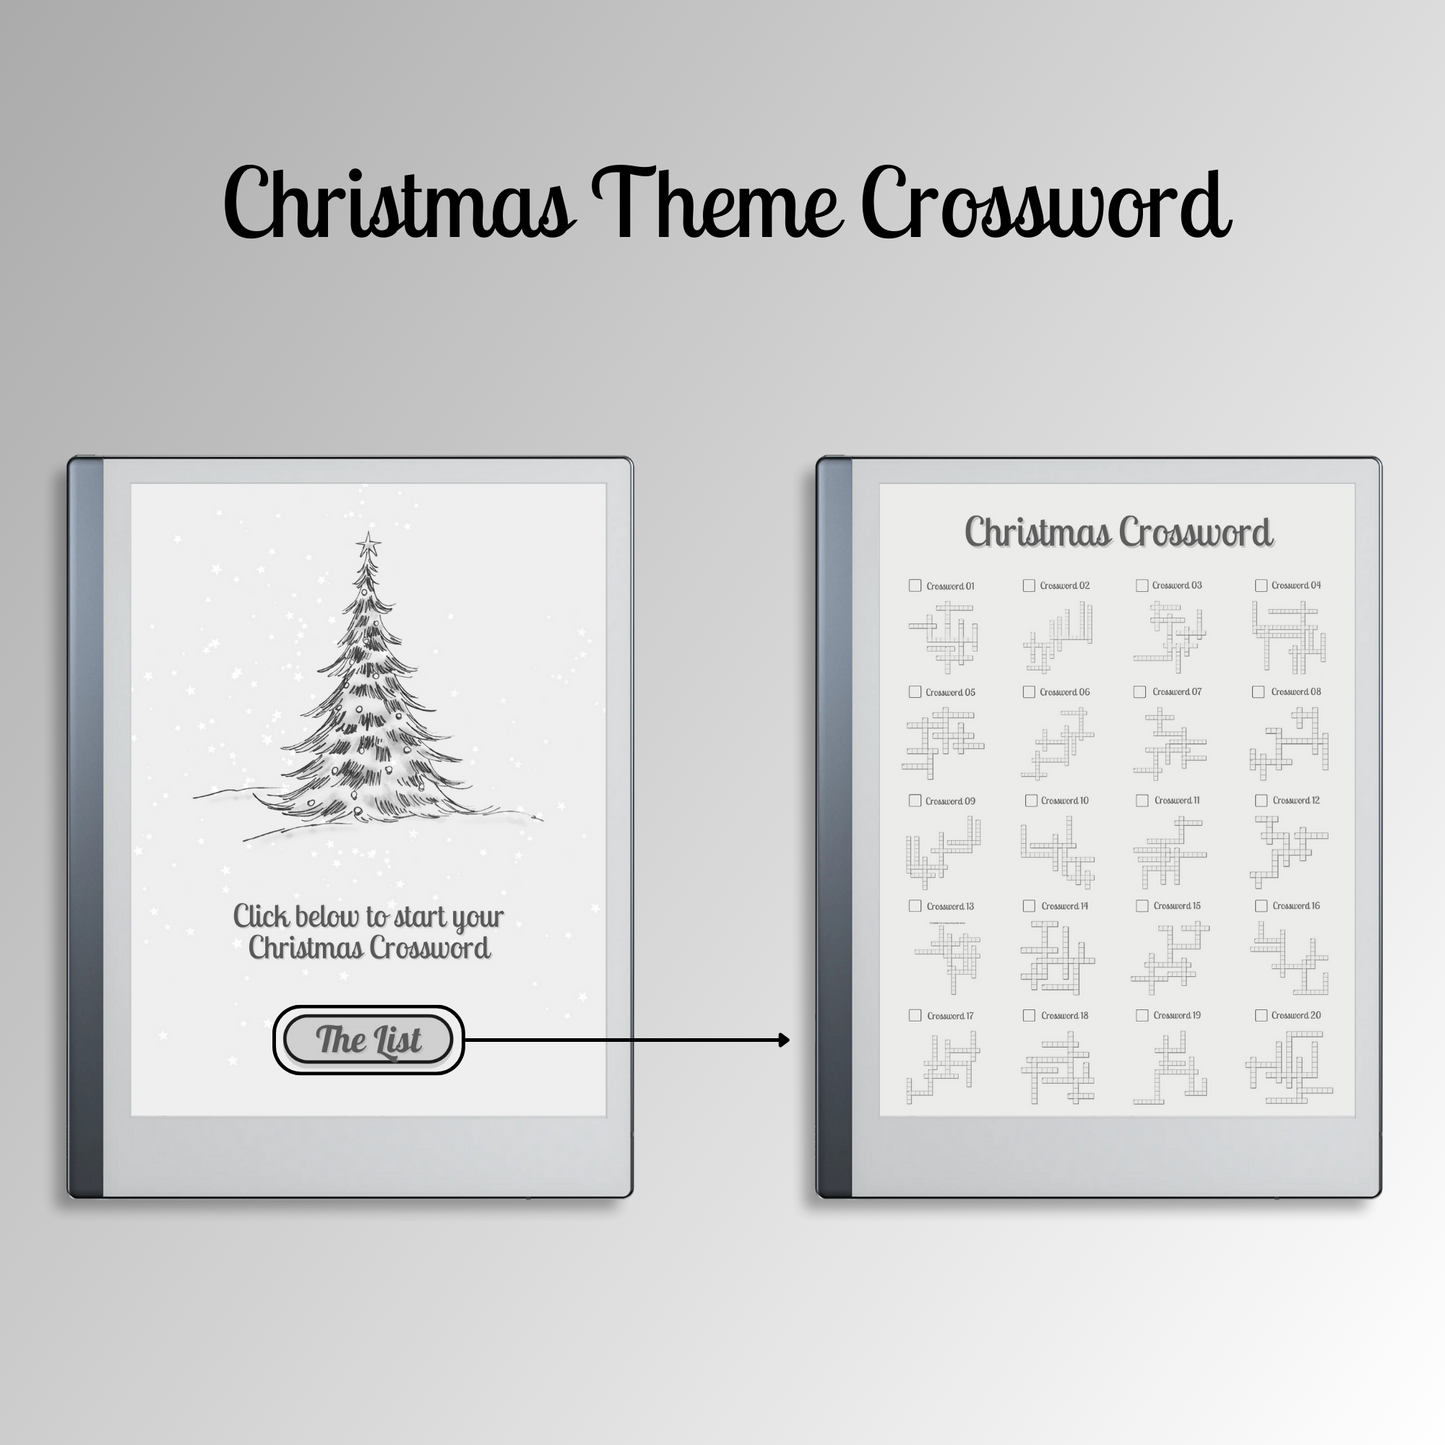 Remarkable 2 Christmas Crossword with easy navigations.